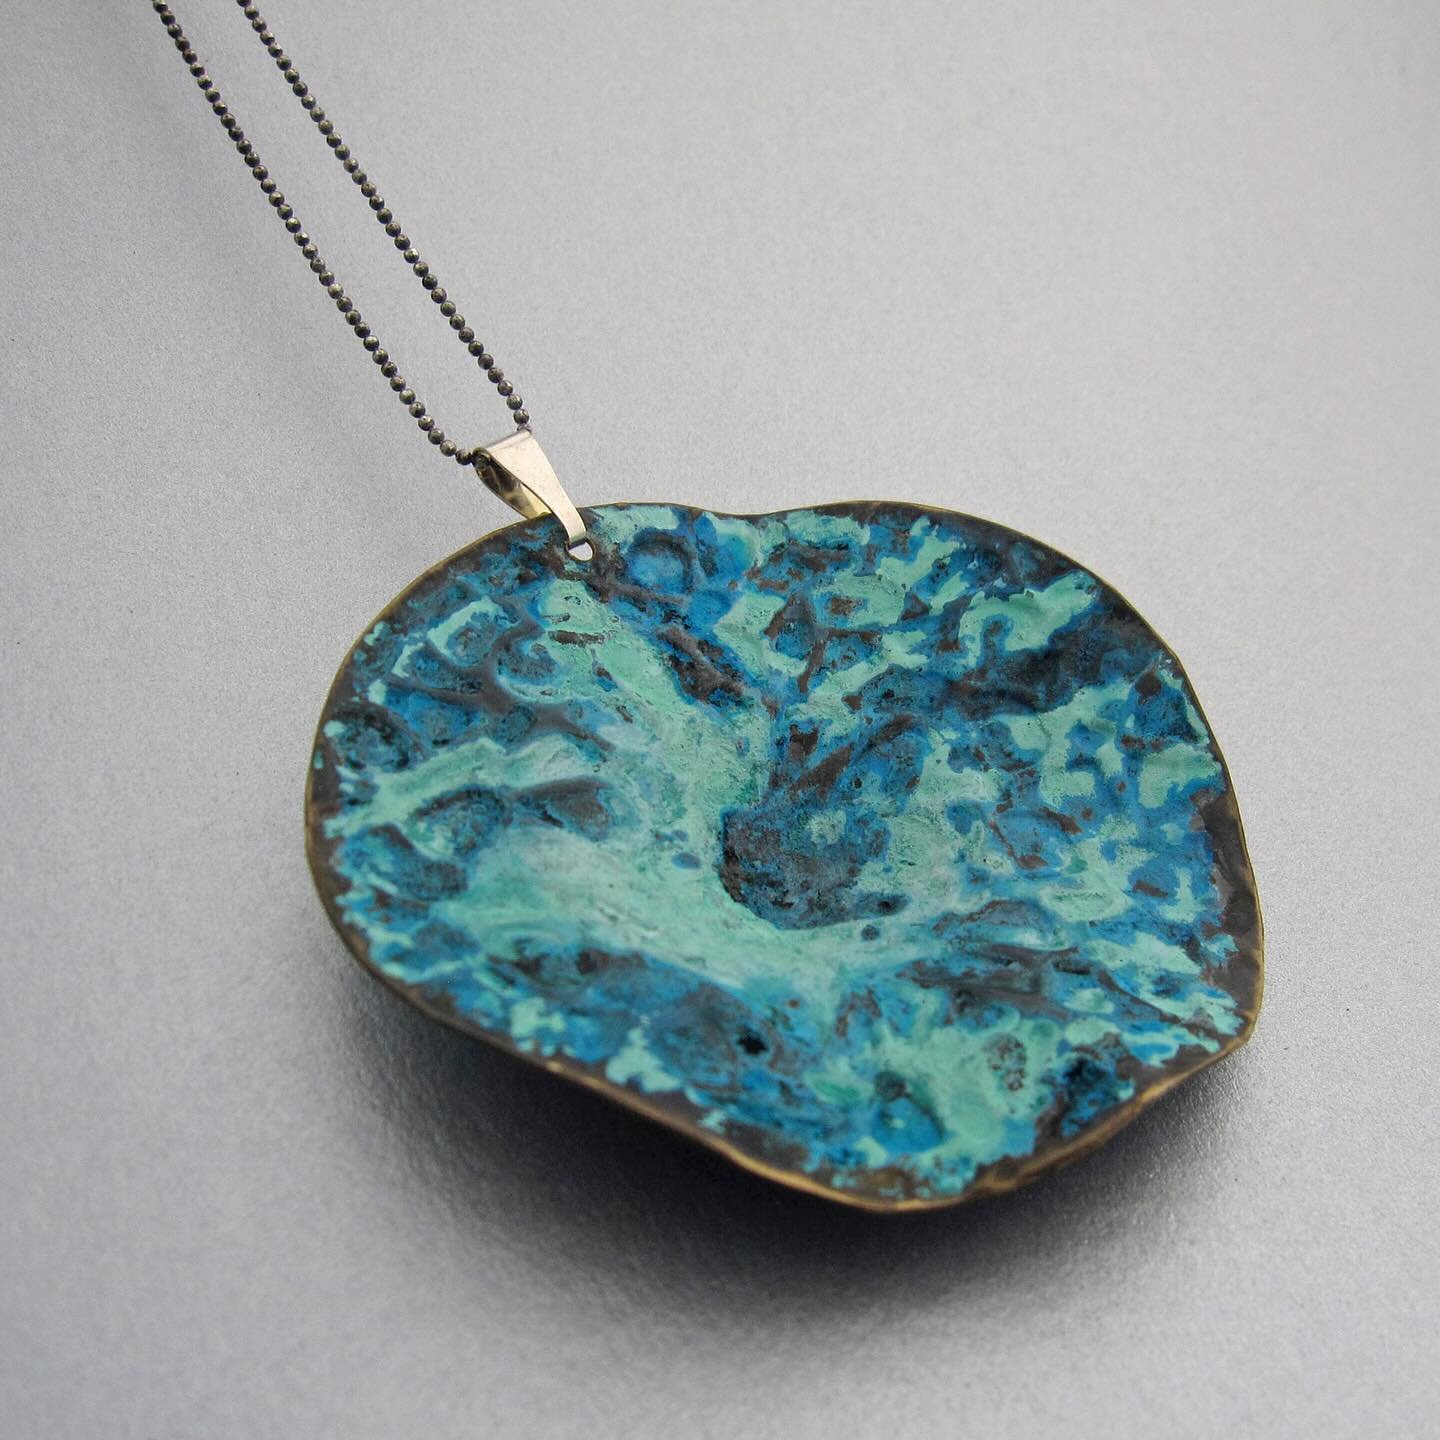 A new and distinctive necklace - to wear in two different ways - from my one of a kind collection. The piece is inspired by a Propora. Handcrafted in copper with a patina created with household products, this pendant comes with an oxidized silver cha